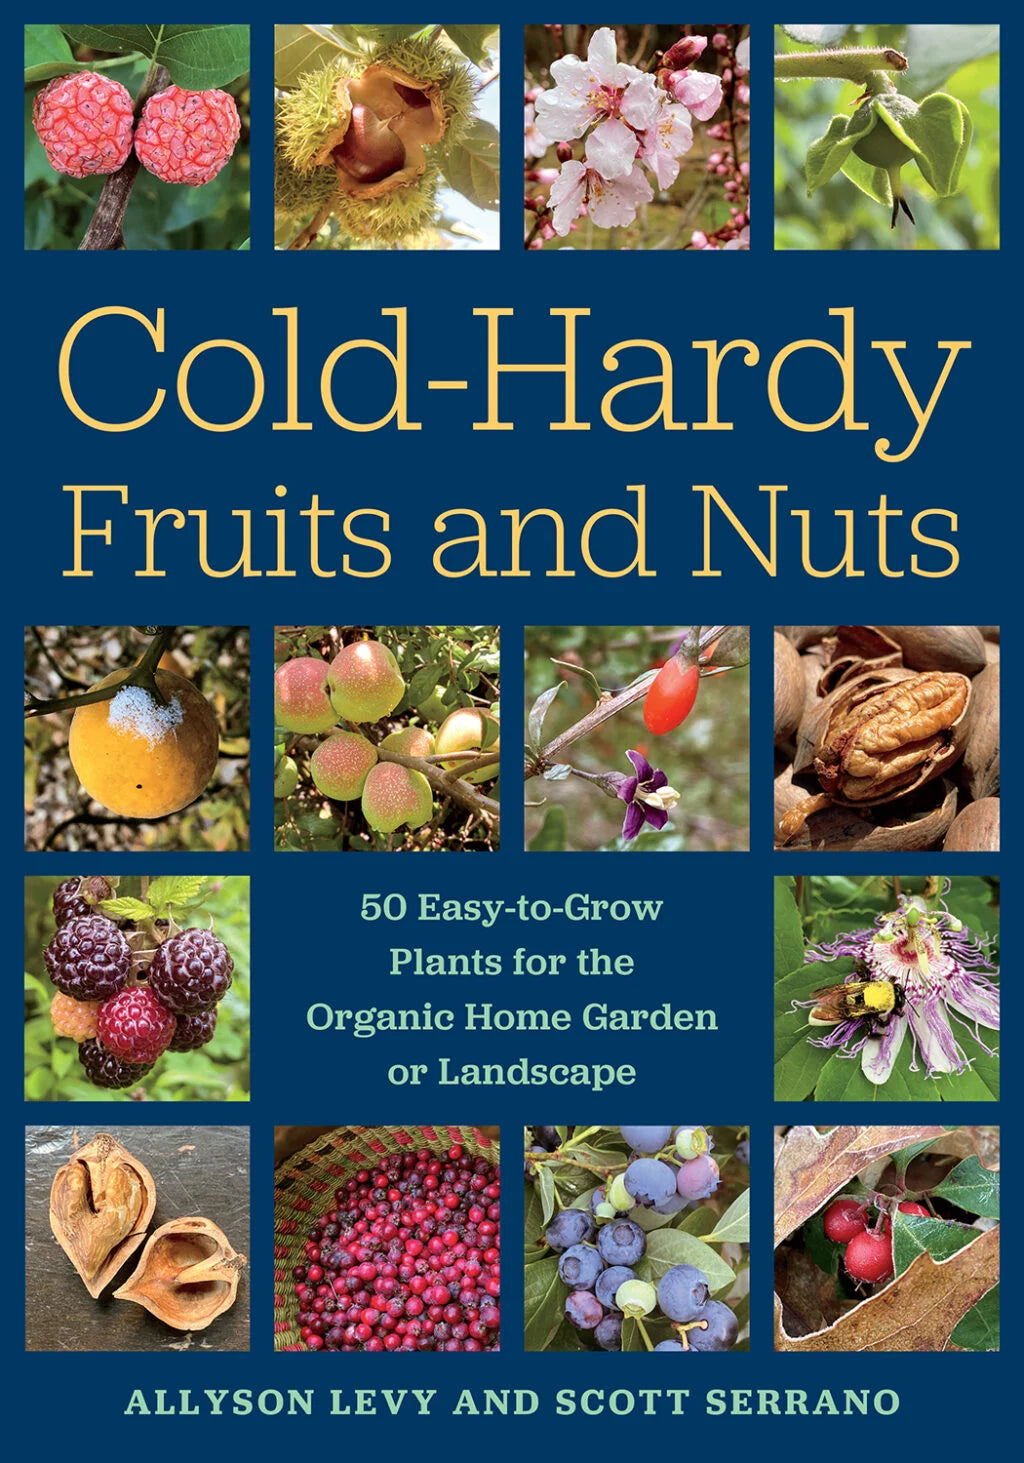 Cold-Hardy Fruits and Nuts by Allyson Levy and Scott Serrano - The Josephine Porter Institute